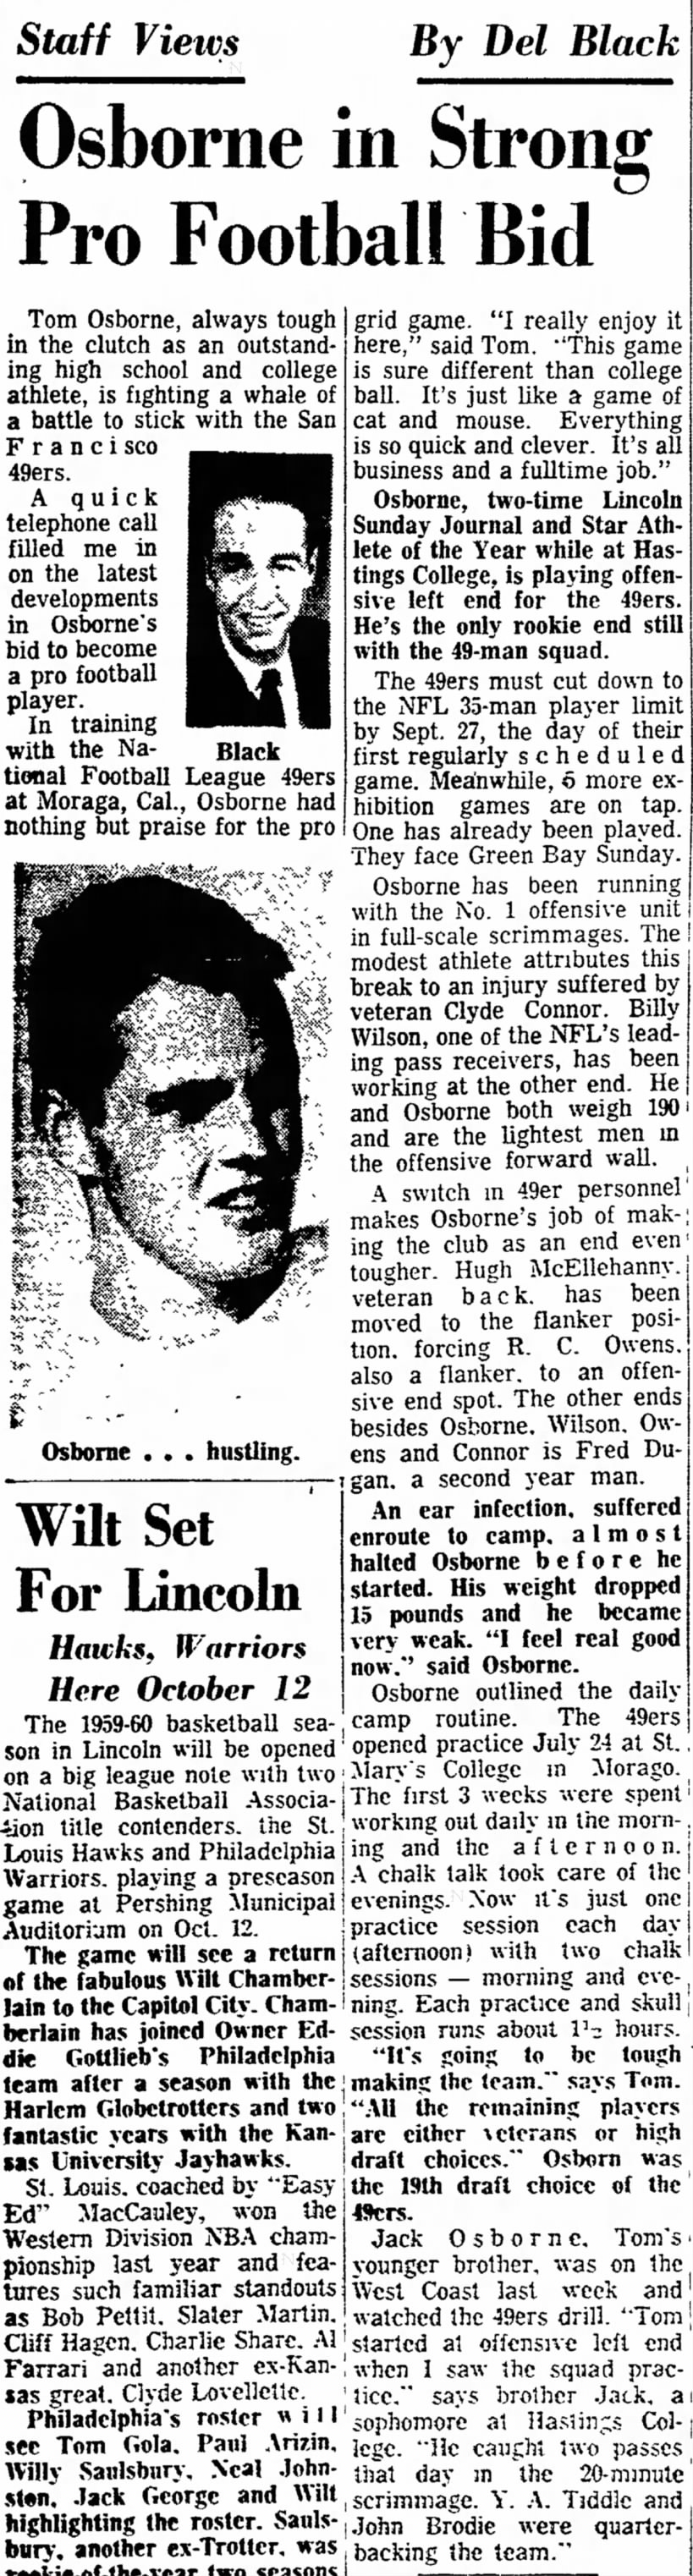 1959 Tom Osborne trying to stick with 49ers